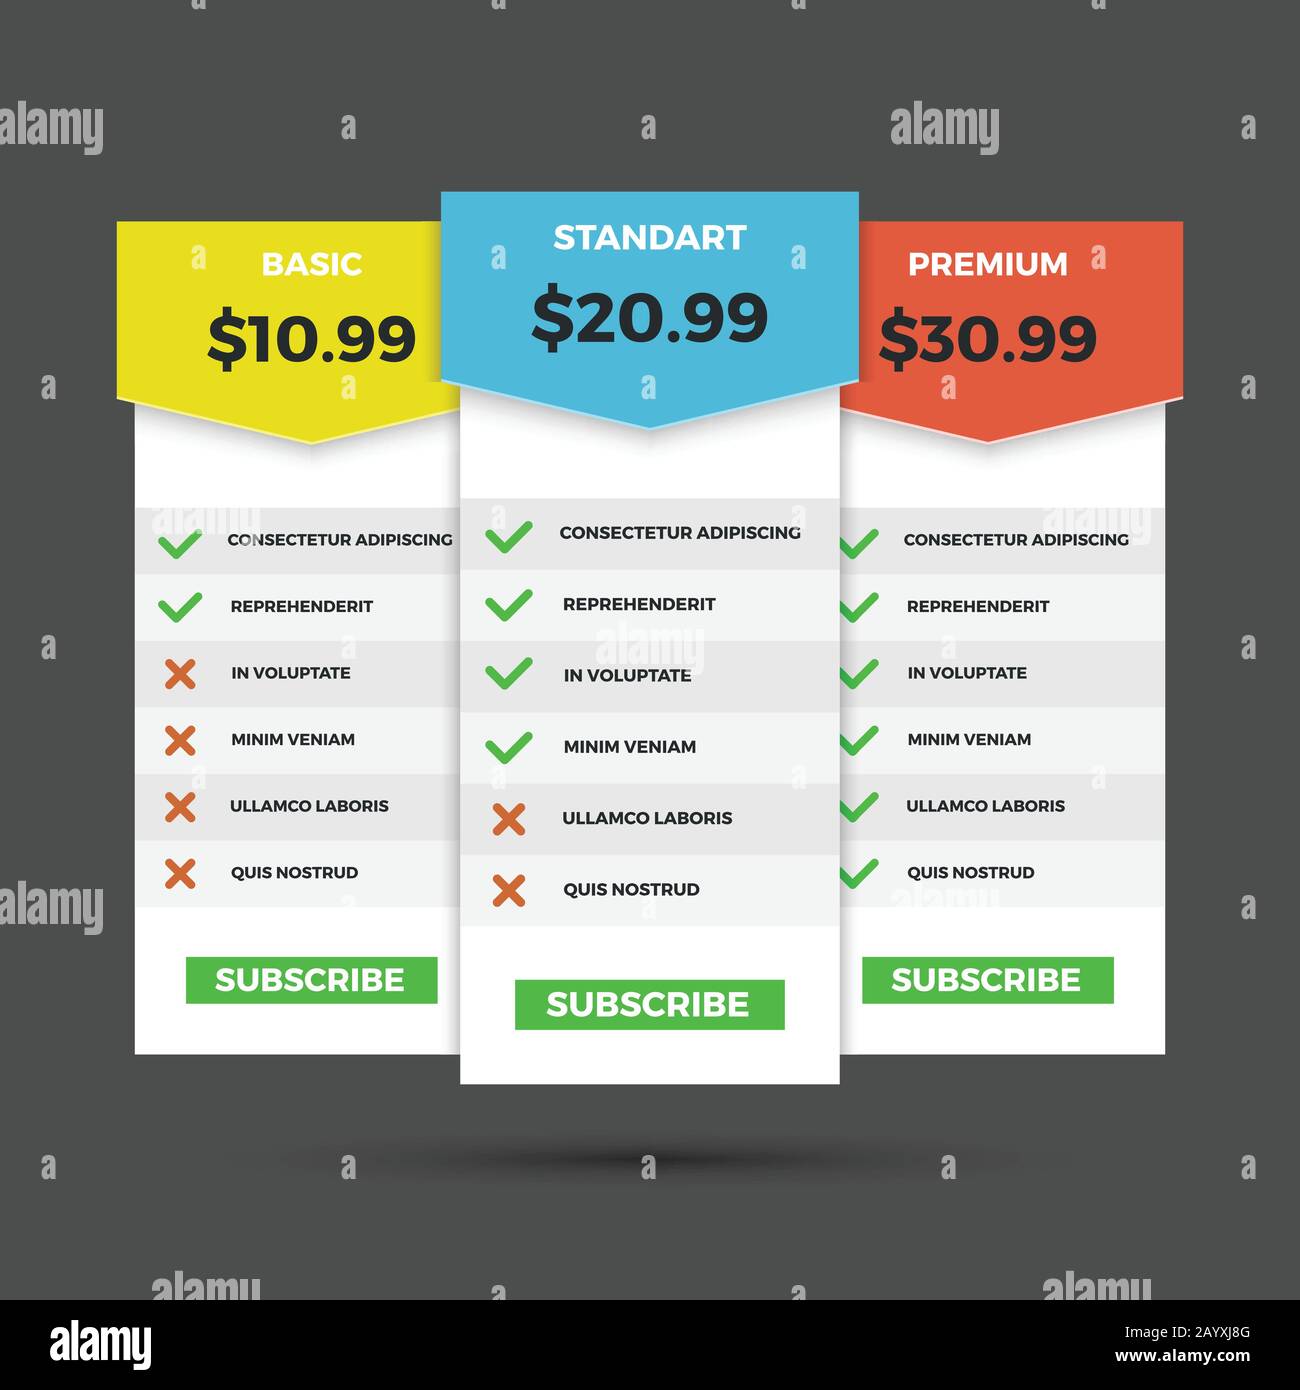 Pricing table for websites and applications vector template. Basic price, standart price and premium price table Stock Vector